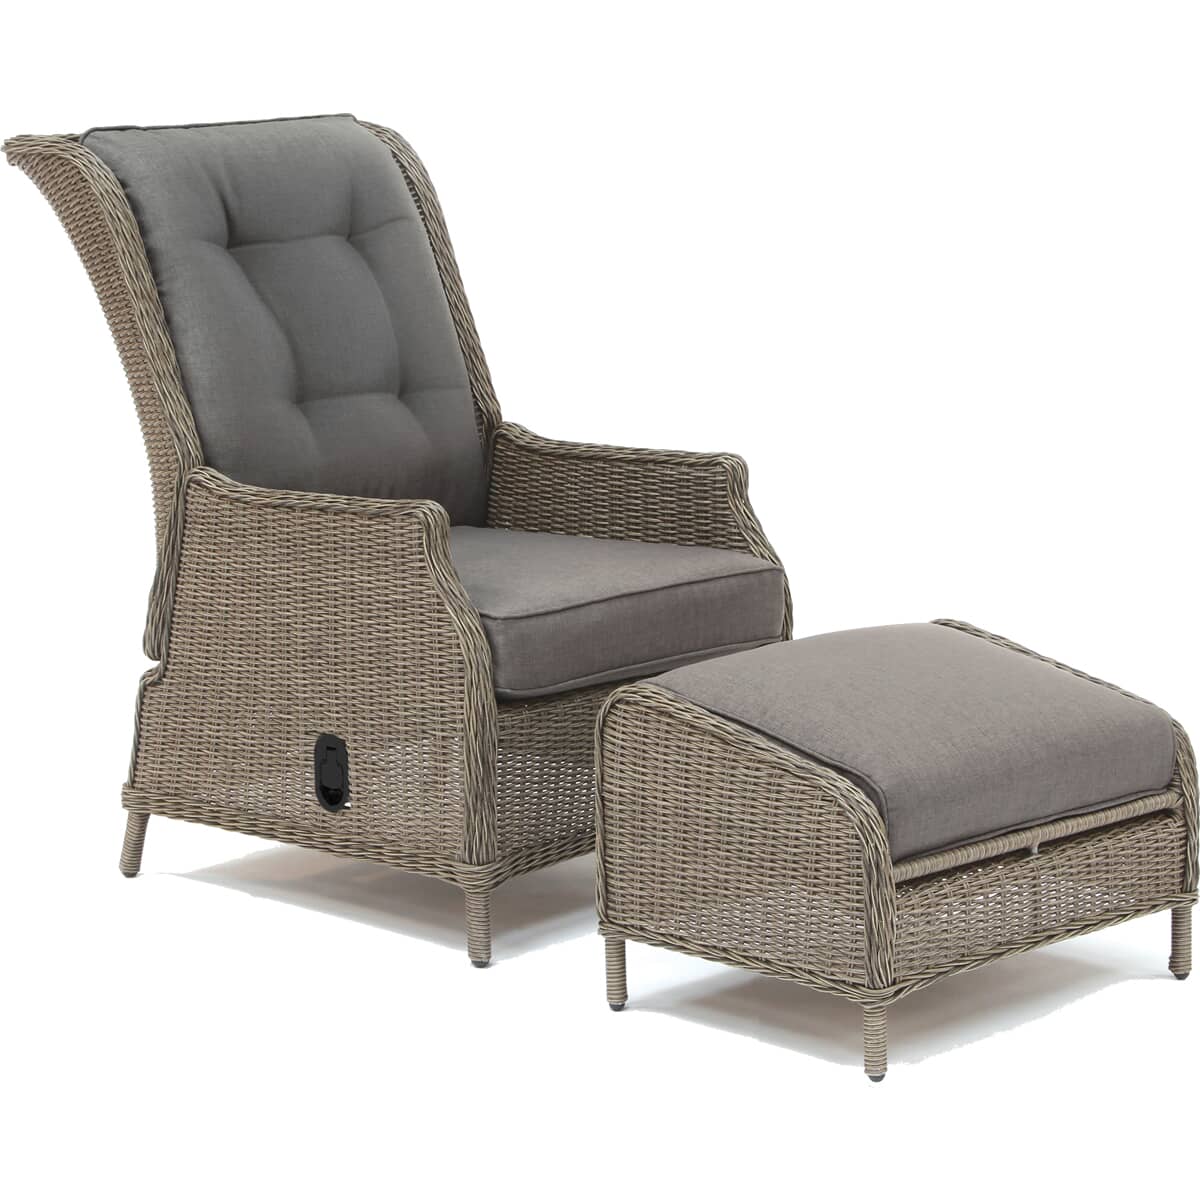 Kettler Palma Recliner with Footstool - Rattan with Grey Taupe Cushions